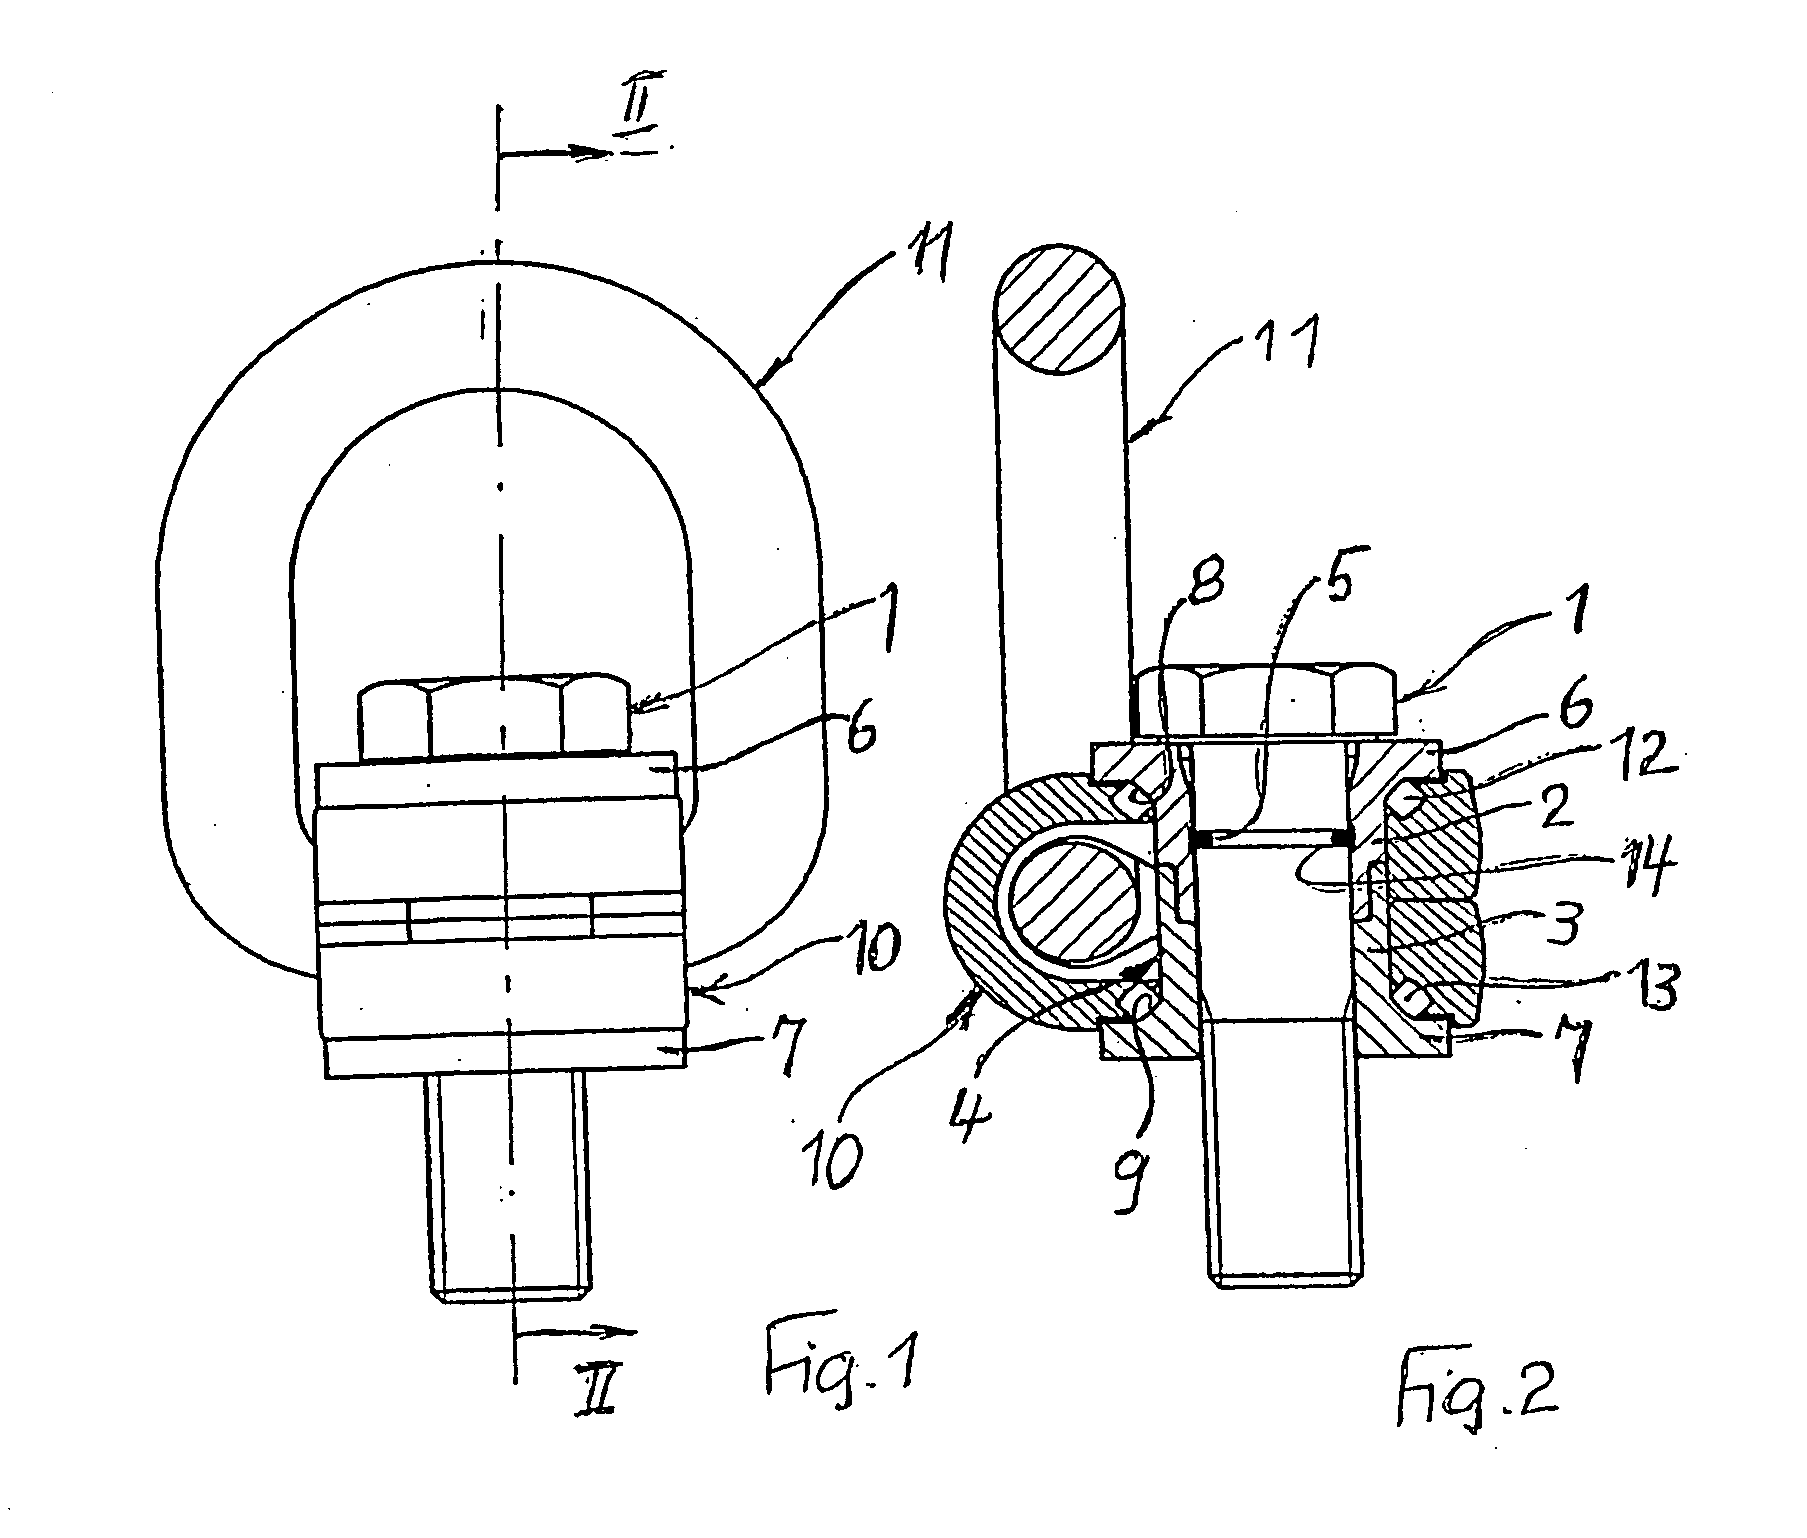 Attachment device for attaching slinging or lashing means